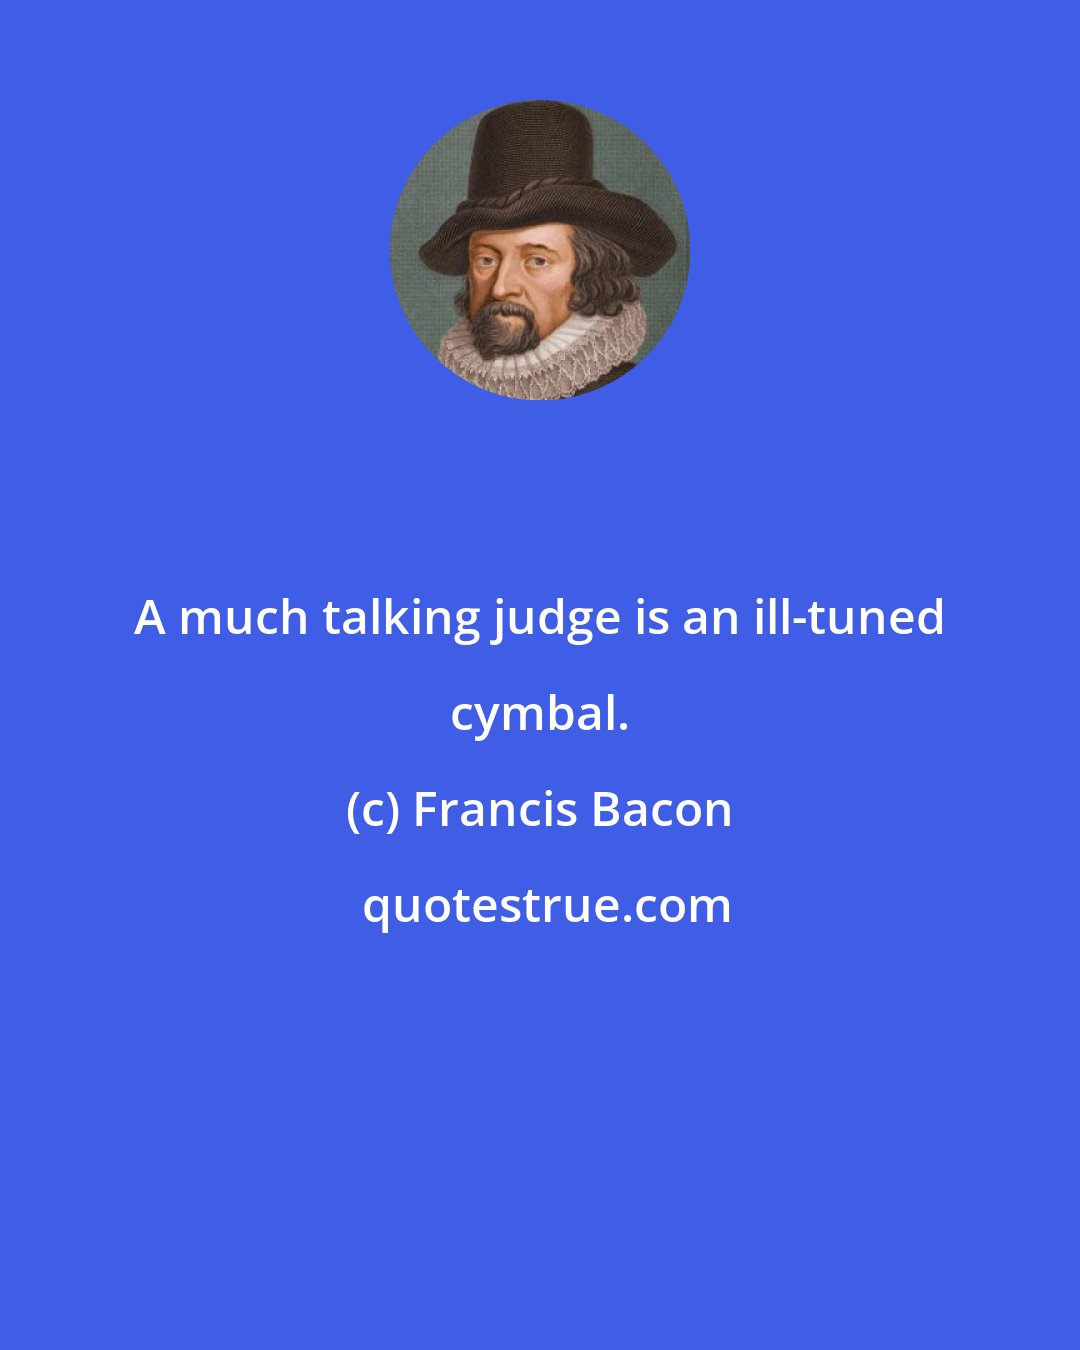 Francis Bacon: A much talking judge is an ill-tuned cymbal.